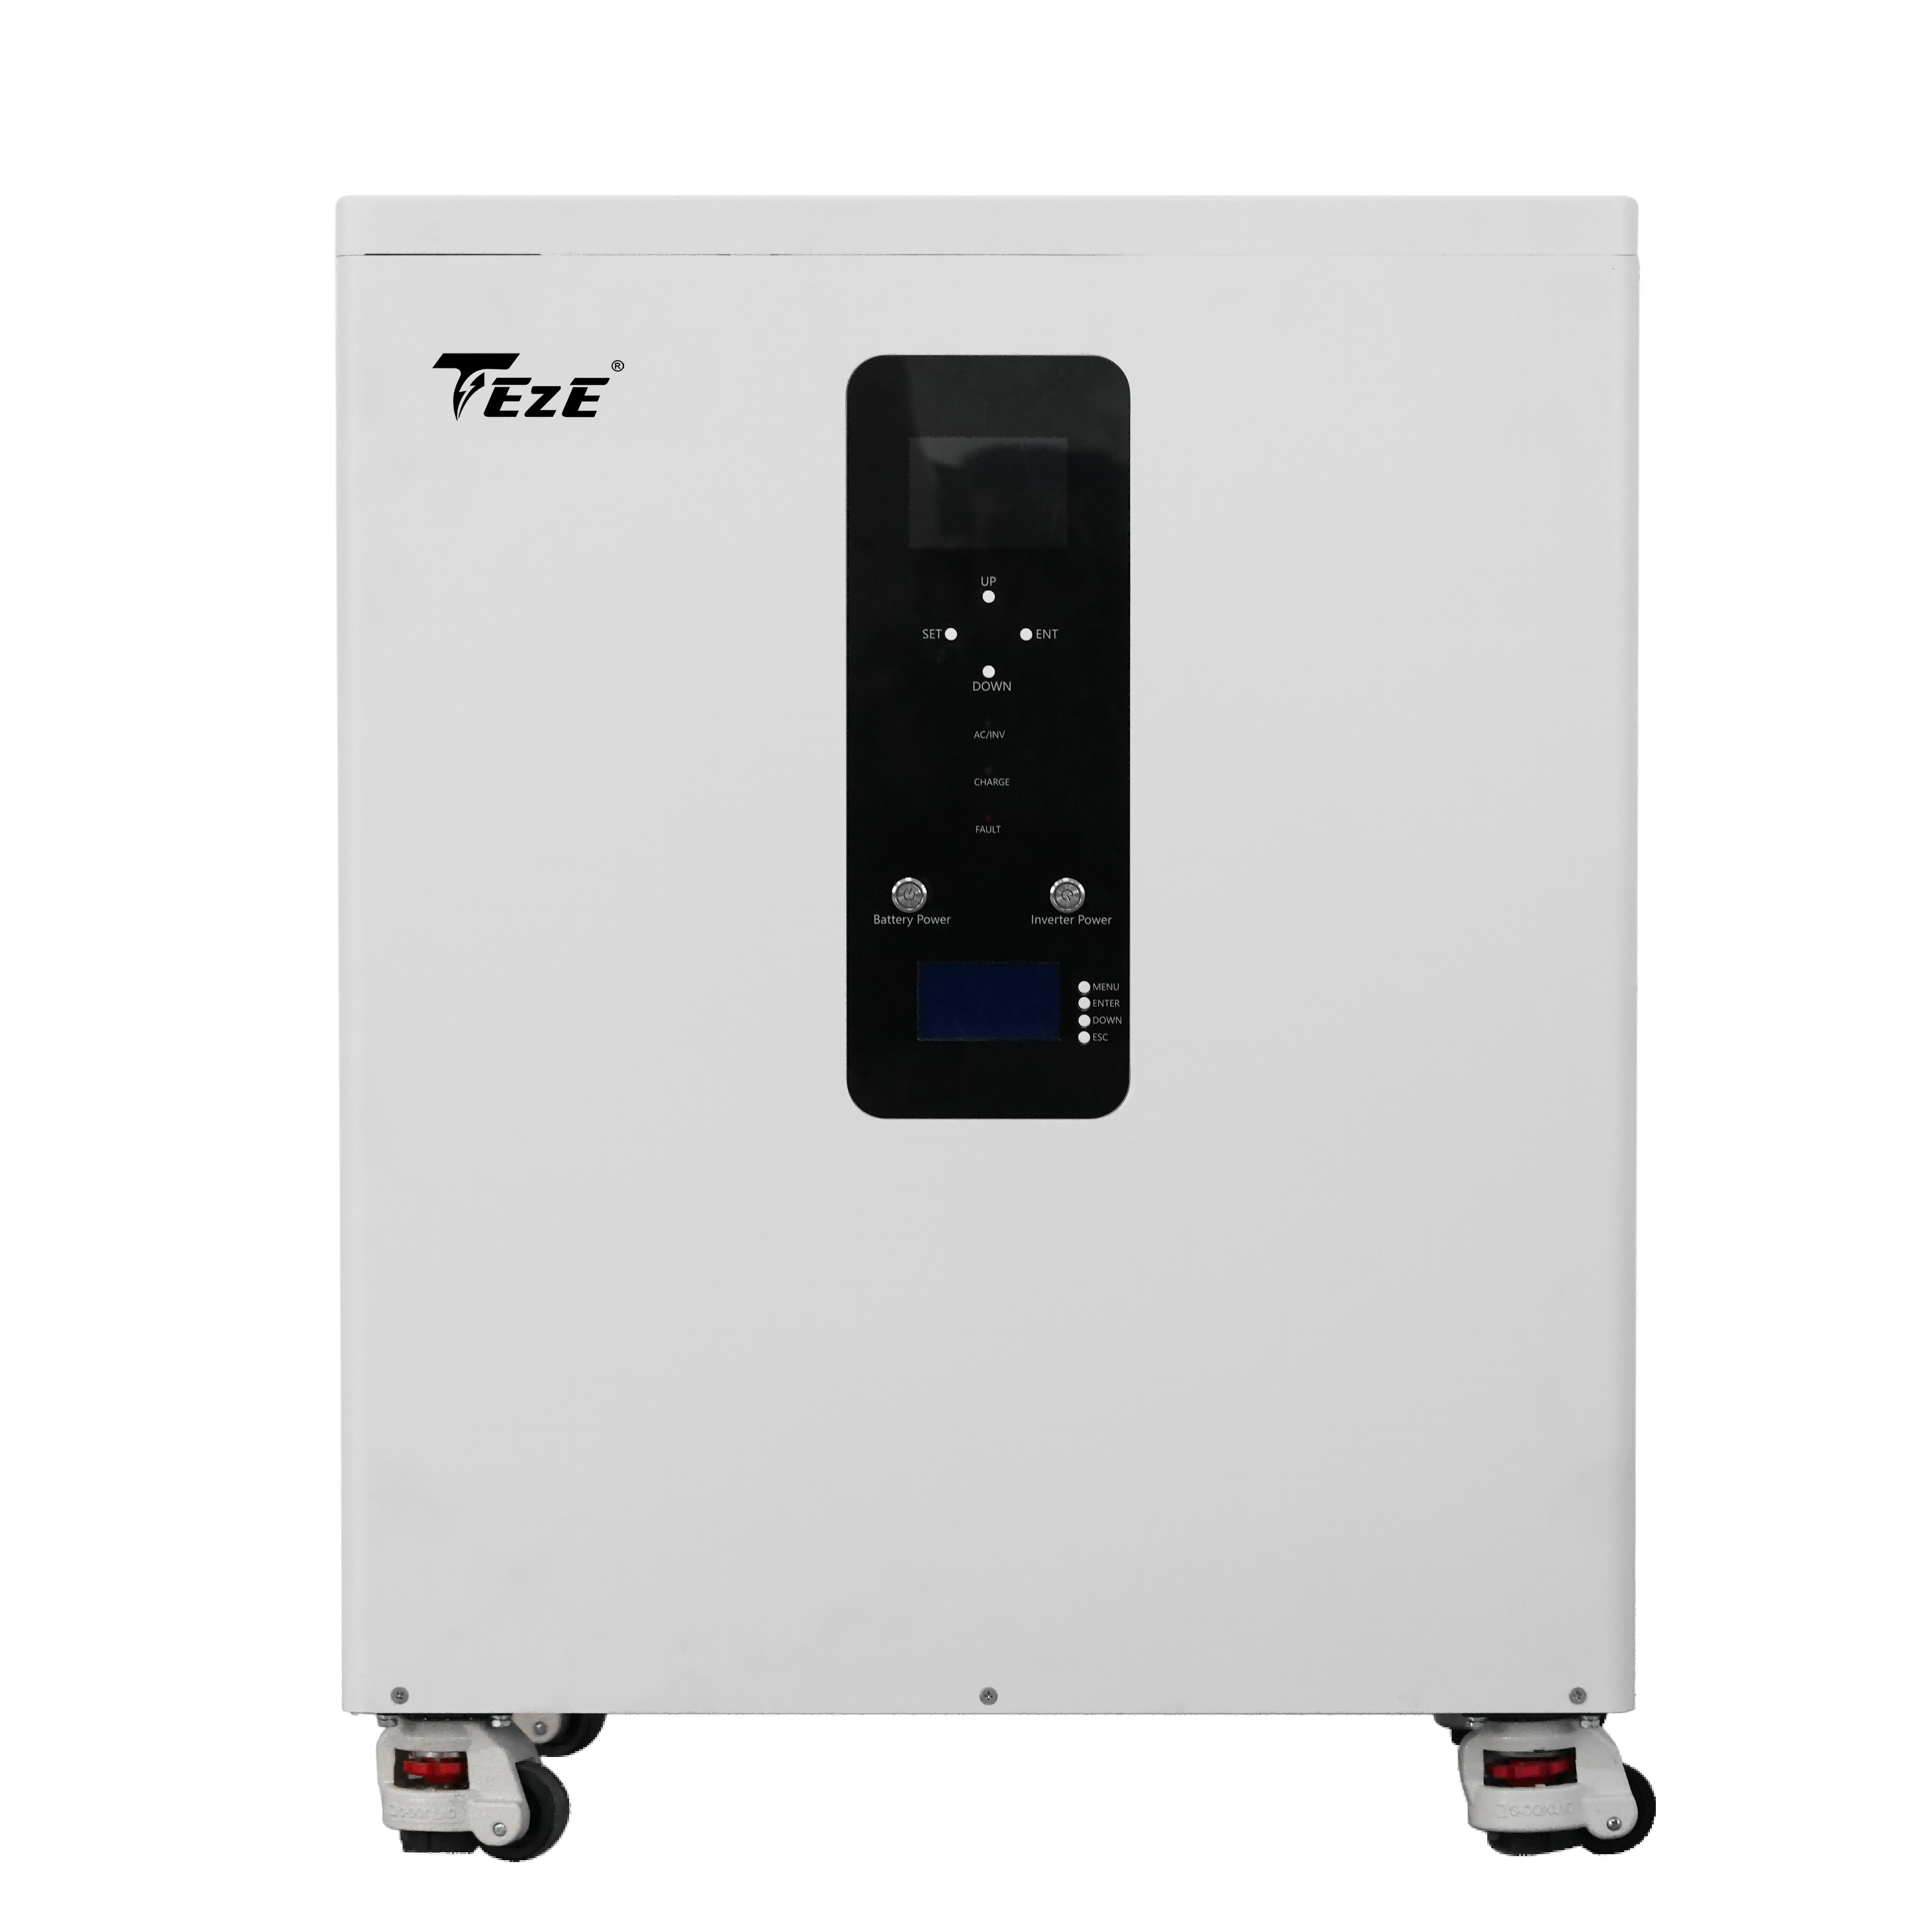 TezePower 51.2V 200Ah All in One 10kWh LiFePO4 Battery Mobile ESS with Active Balancer, Built-in BMS, MPPT, 10kw Hybrid Inverter